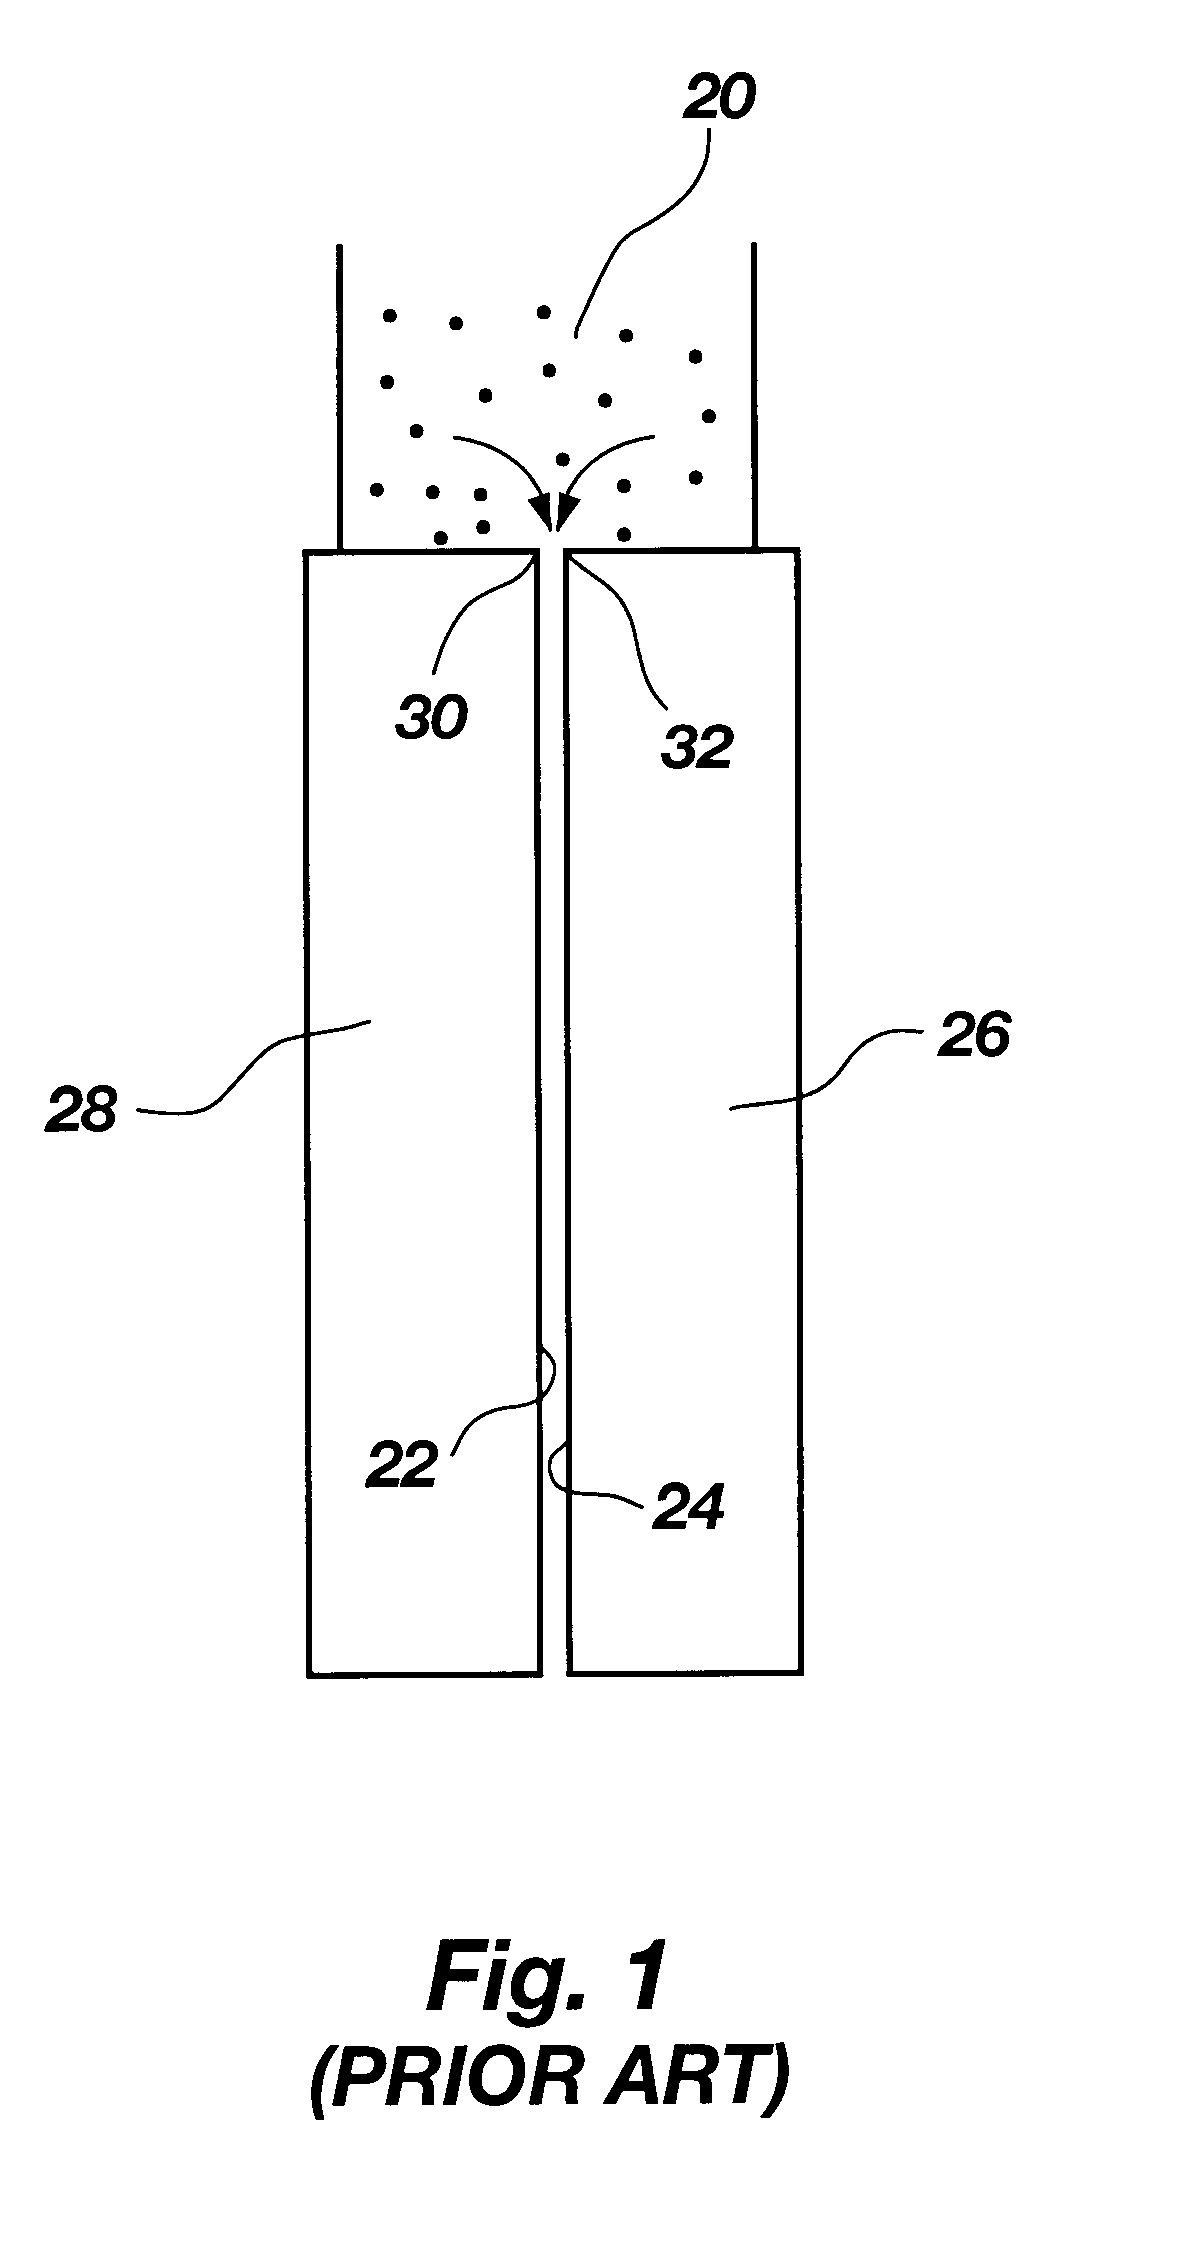 Method for manufacturing an improved seal for fluid applications